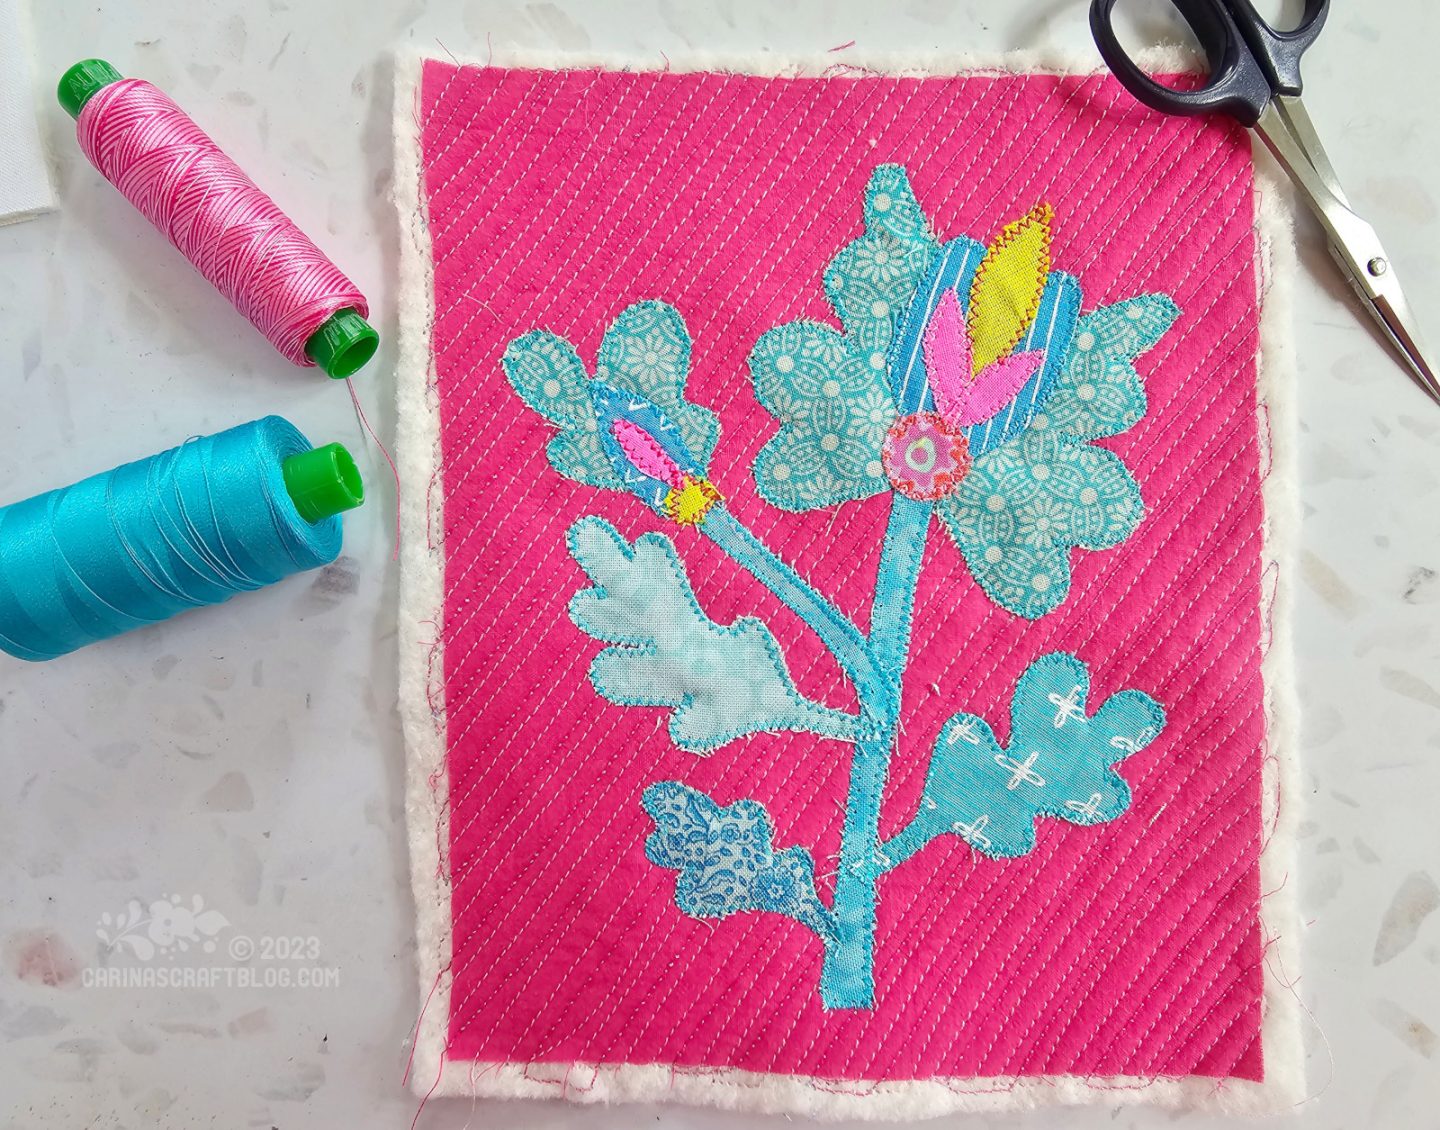 Overhead view of a quilted piece of hot pink fabric with a blue flower appliquéd on top.